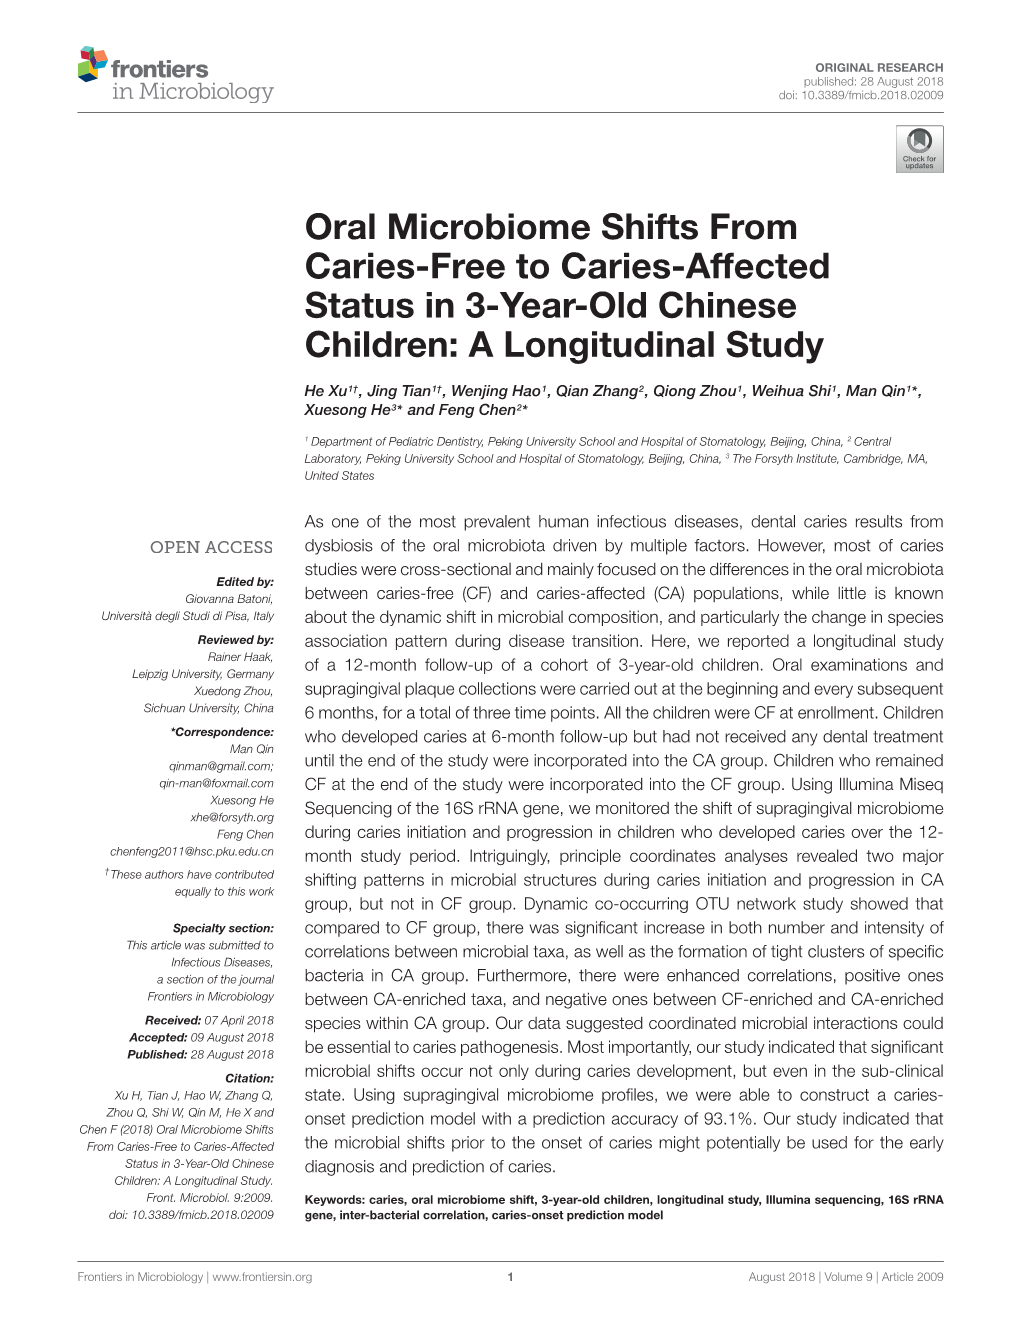 Oral Microbiome Shifts from Caries-Free to Caries-Affected Status in 3-Year-Old Chinese Children: a Longitudinal Study